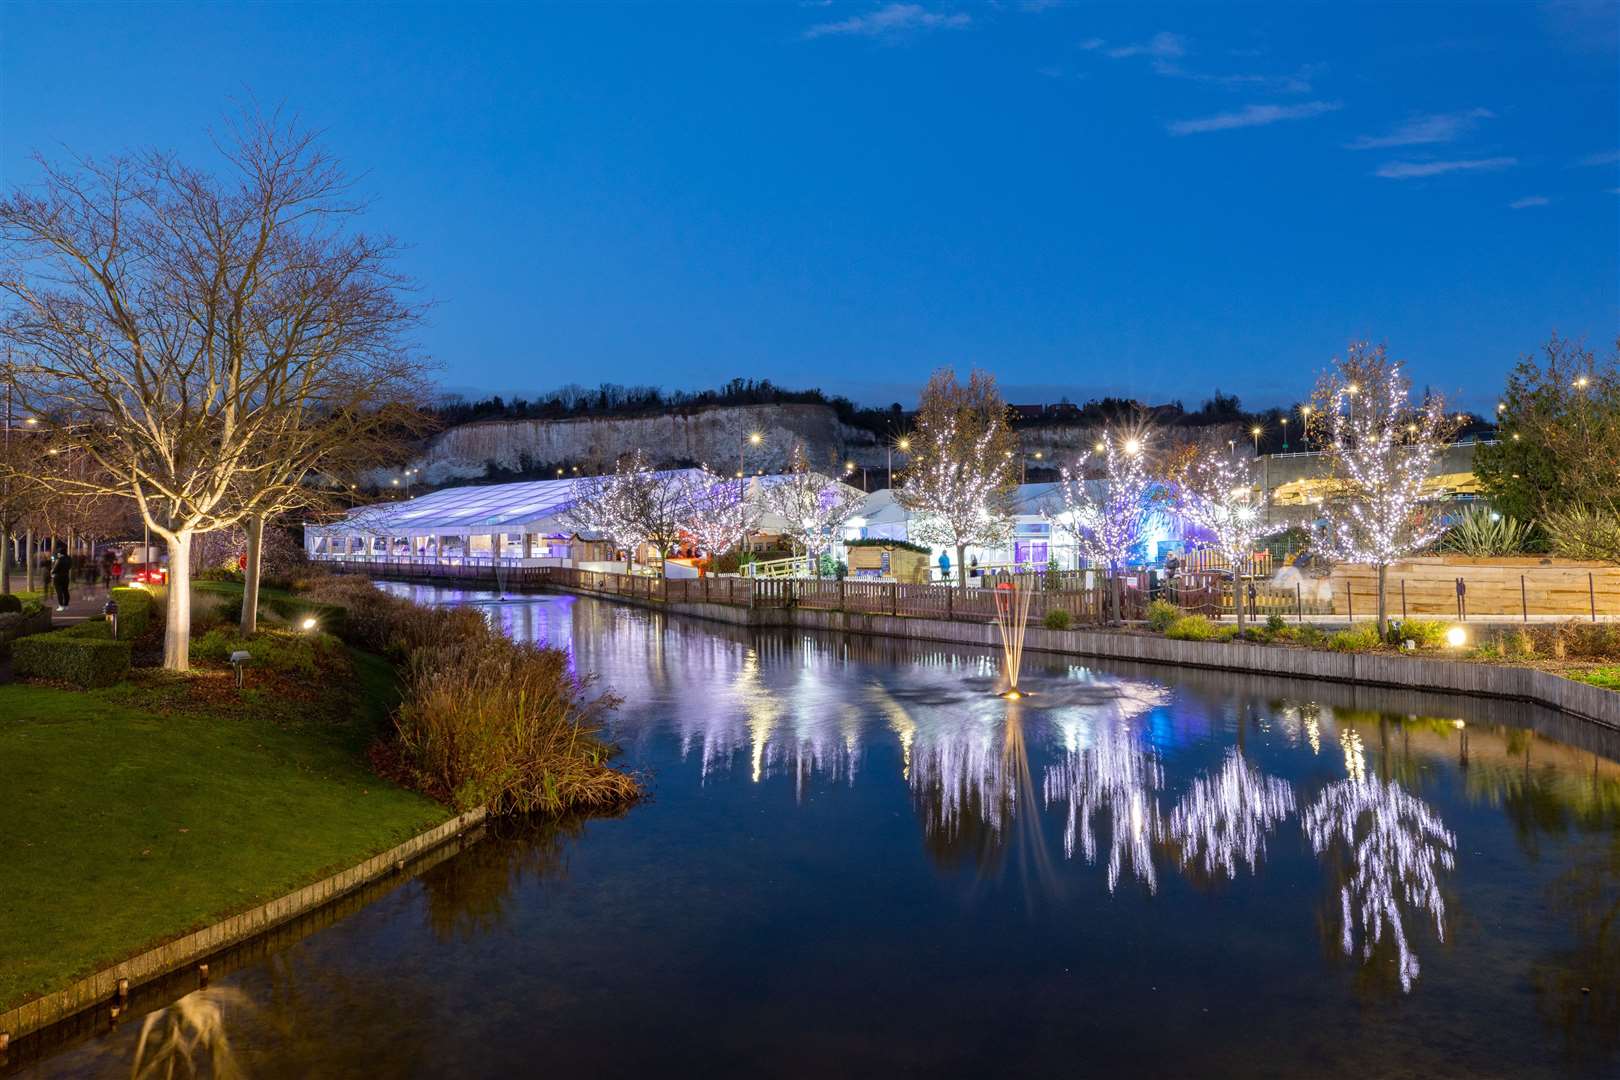 Winterland, Bluewater's outdoor Christmas fair, is returning this November. Photo: Bluewater